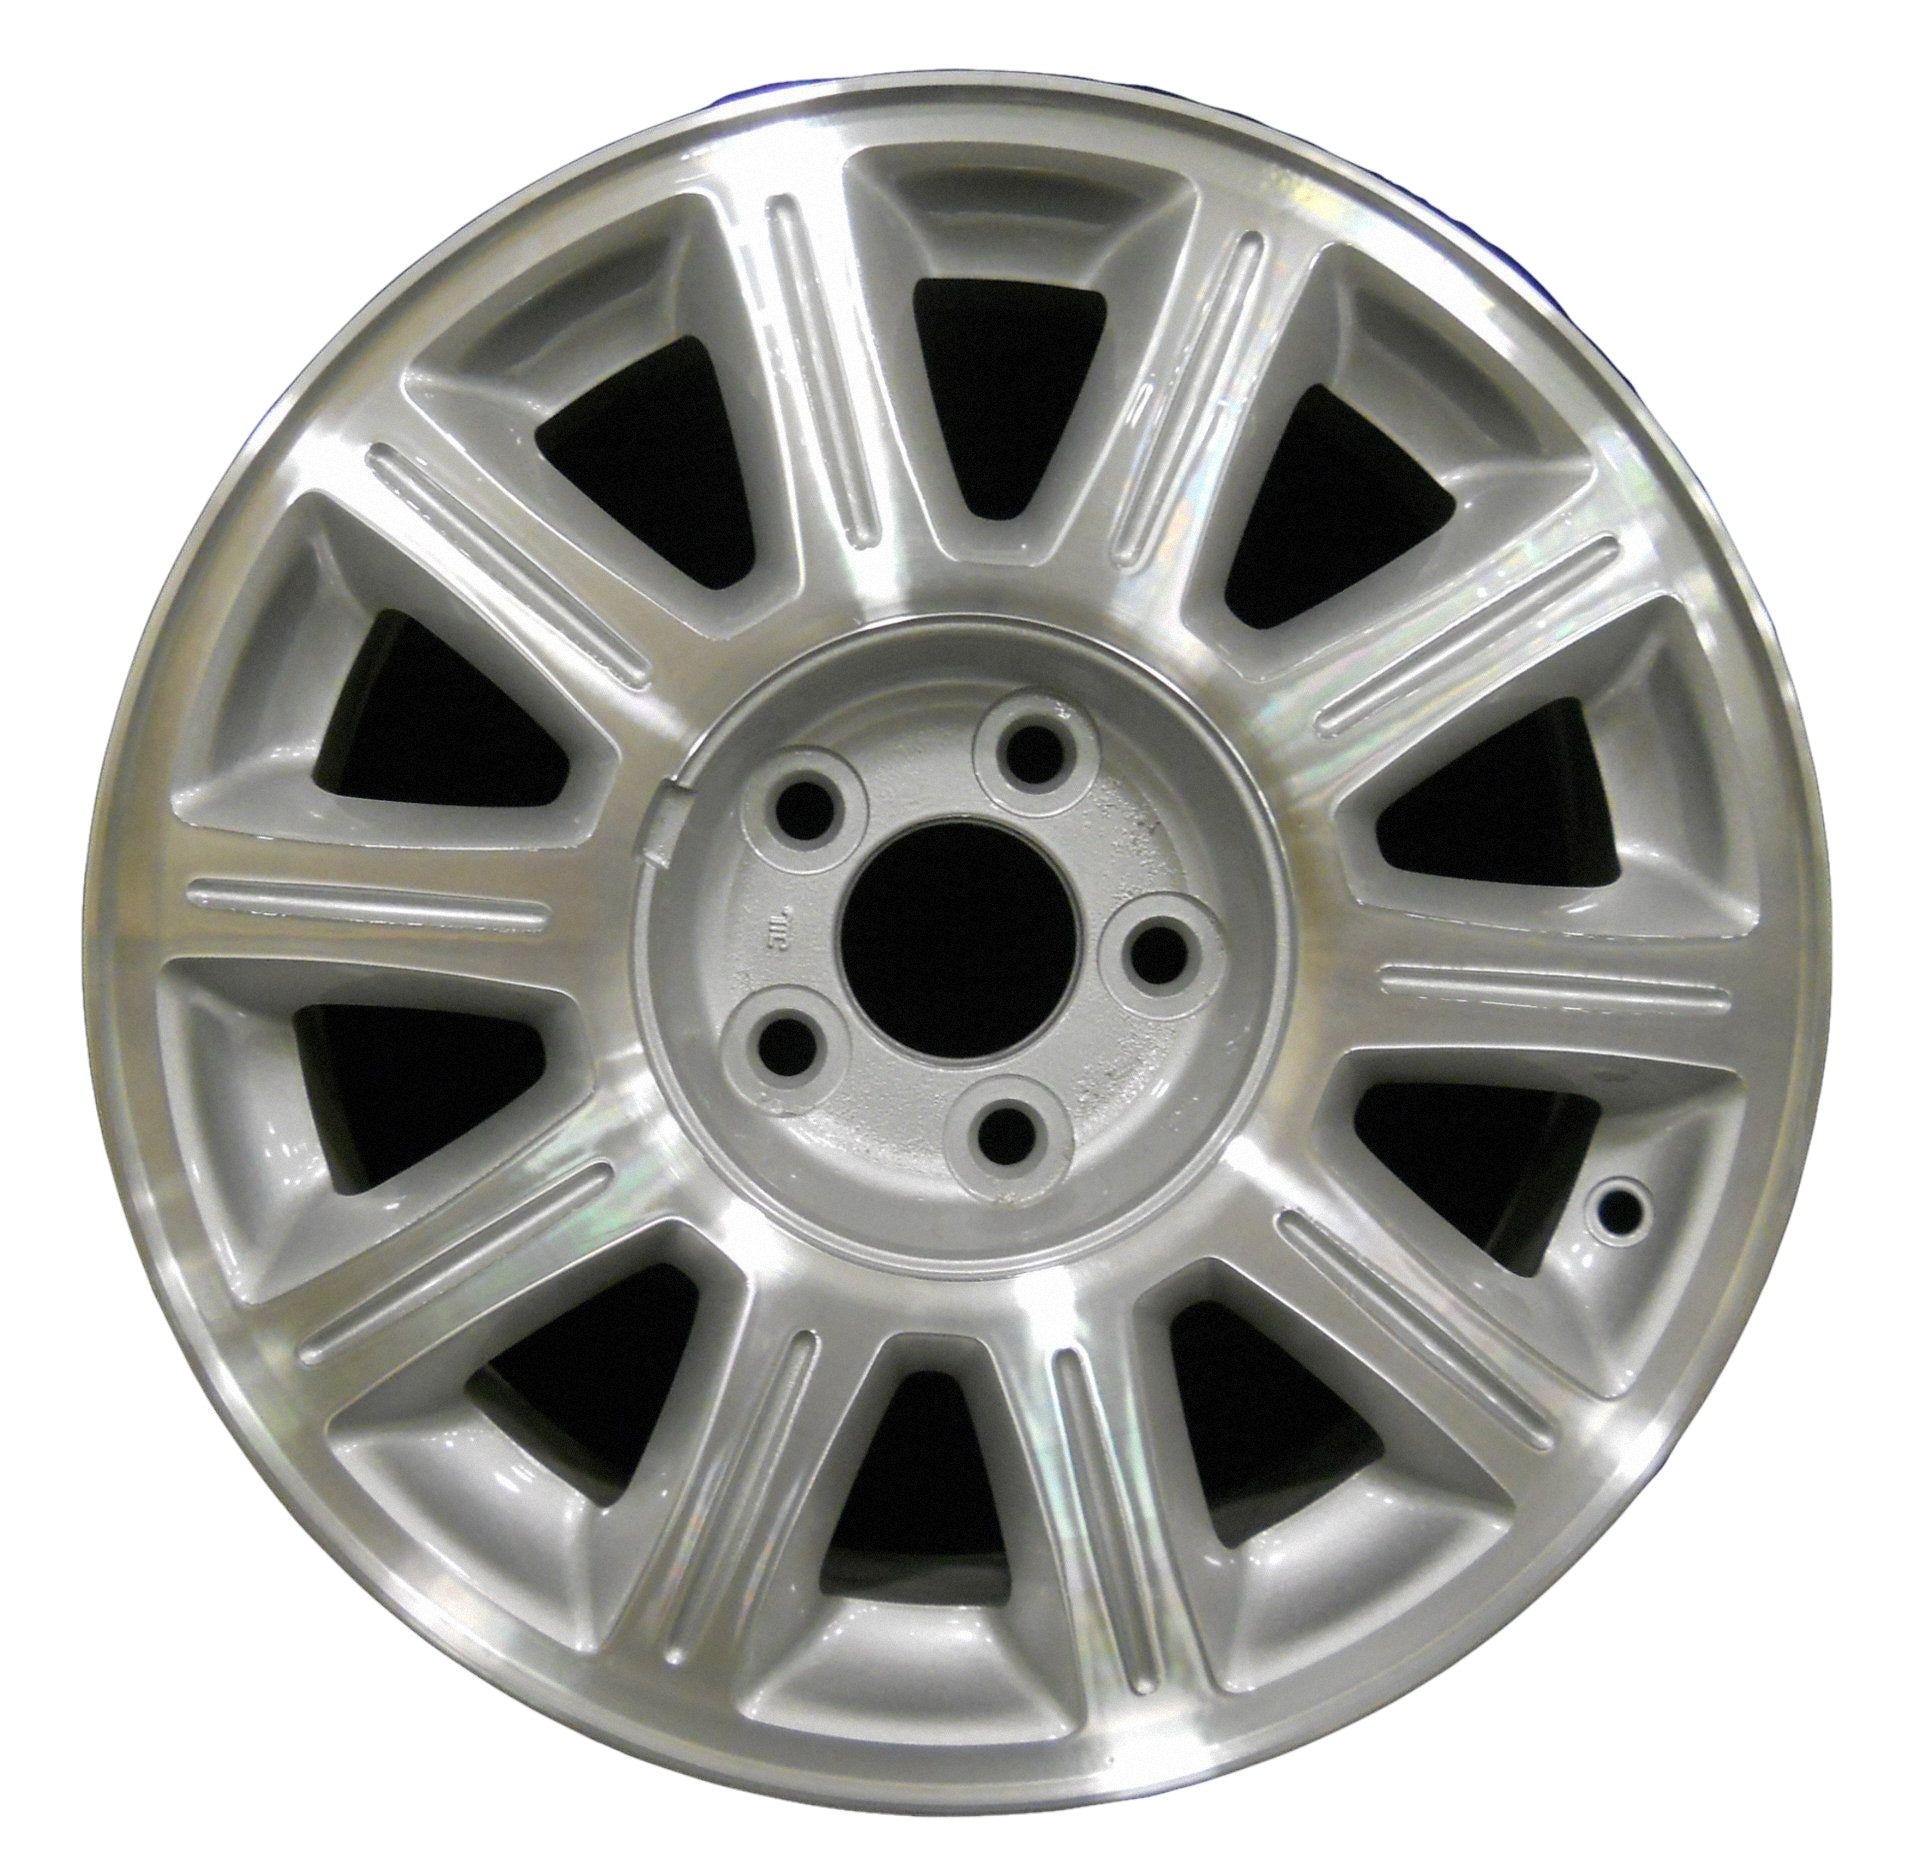 Ford Windstar  2000, 2001, 2002, 2003 Factory OEM Car Wheel Size 16x7 Alloy WAO.3309.PS02.MA